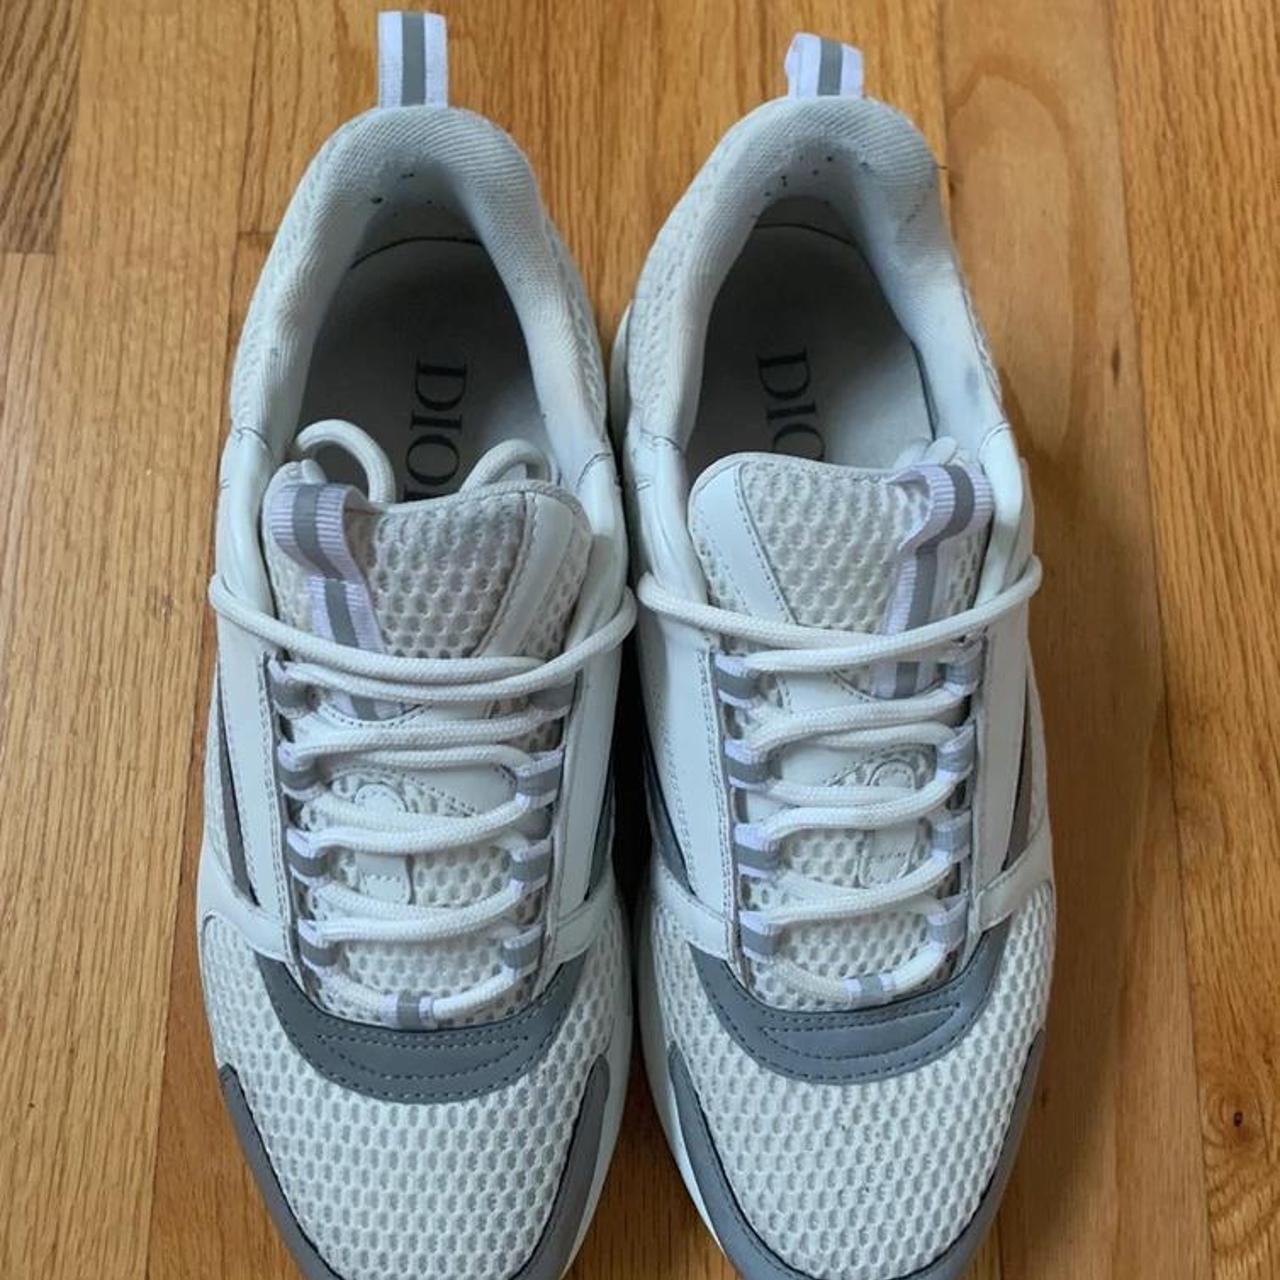 Dior B22 Runners White/Blue/Yellow 100% Authentic - Depop